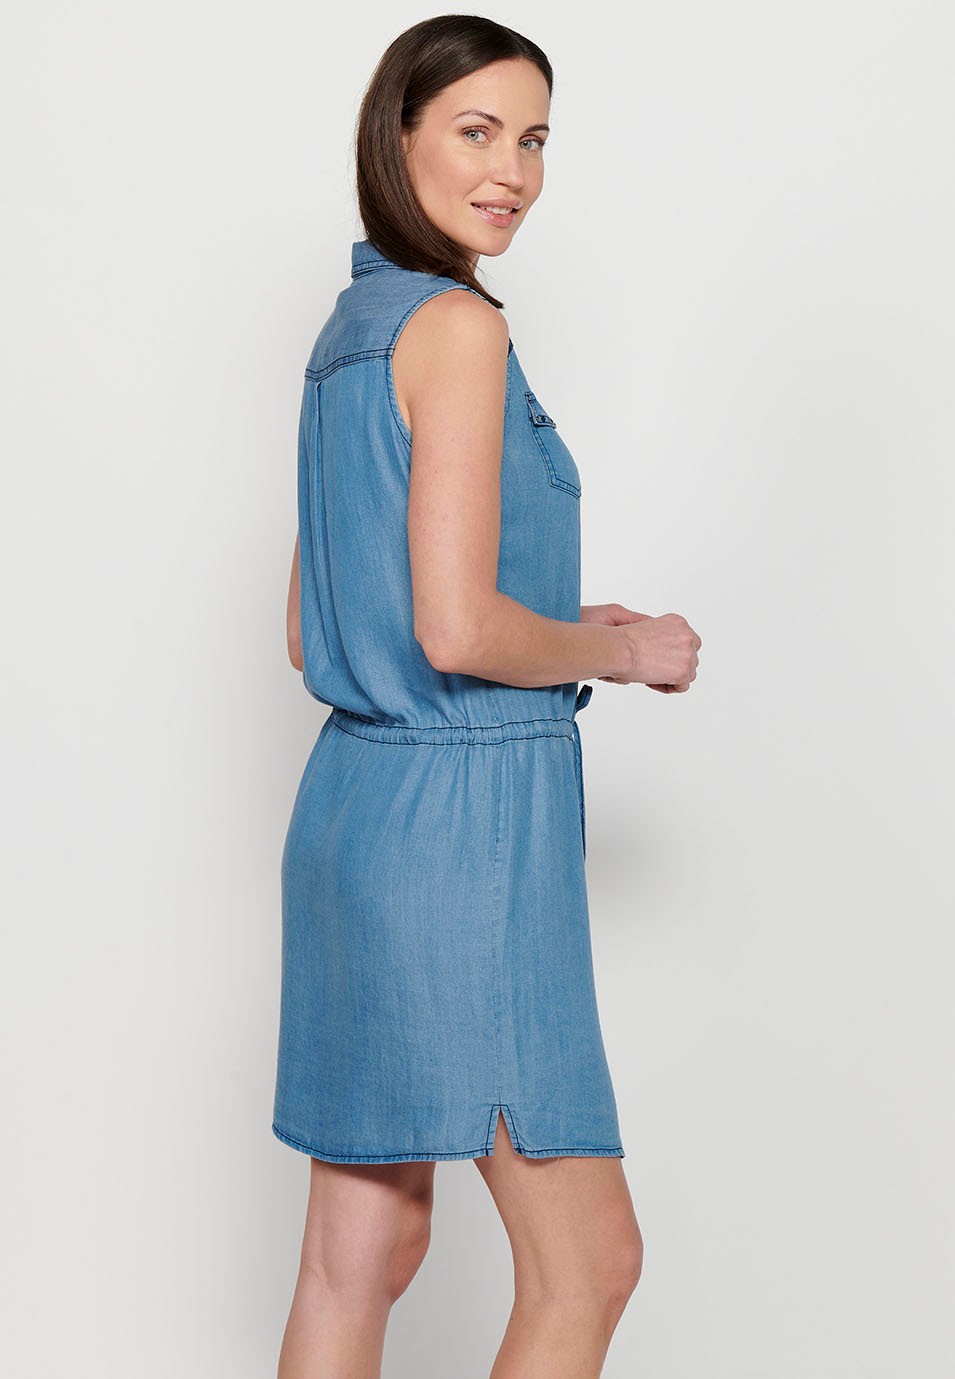 Sleeveless midi dress with front closure with buttons and embroidered details, tight at the waist in Blue for Women 6